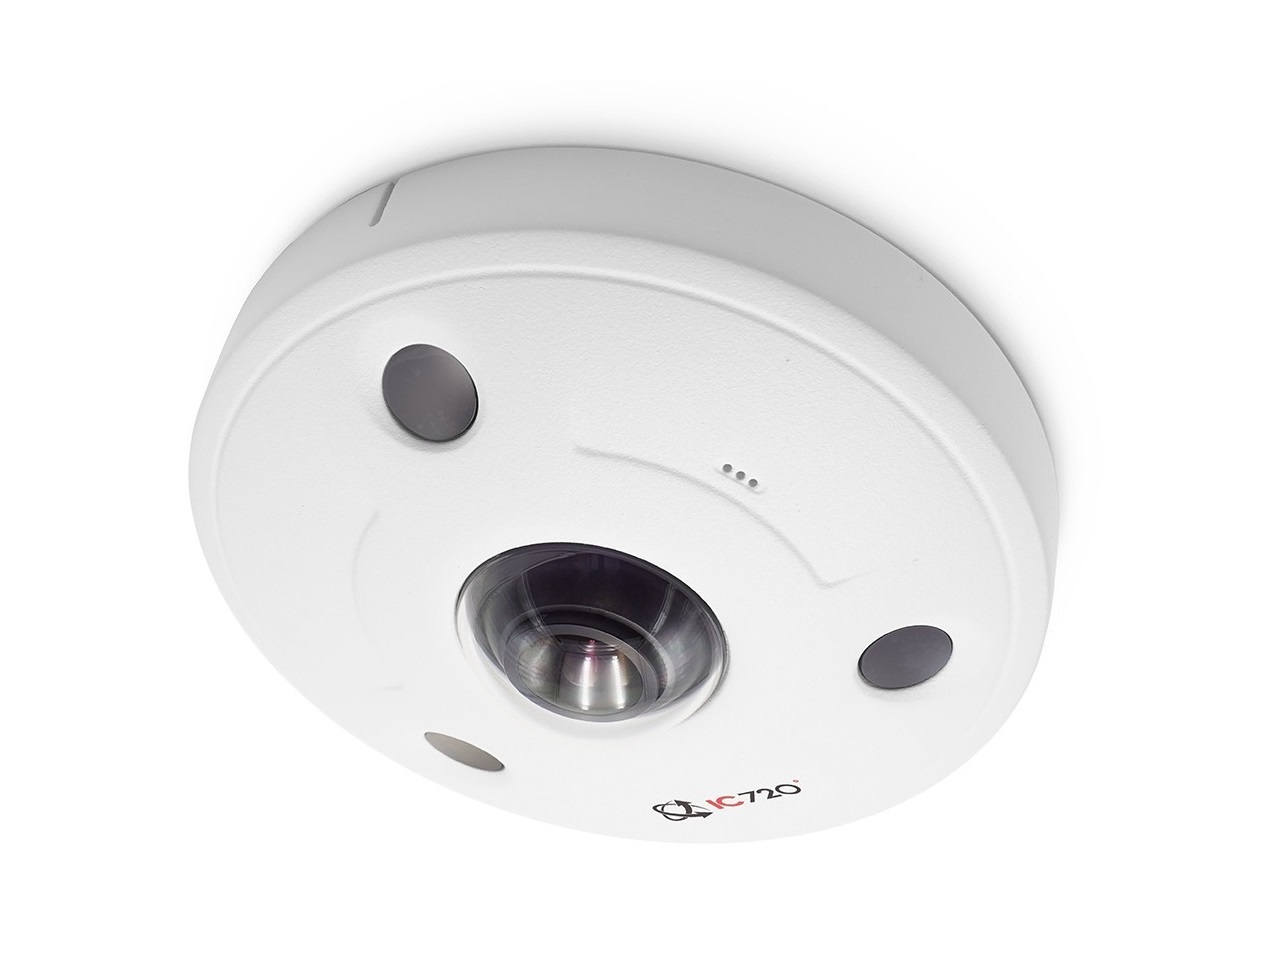 IPEL-F12F-IRW2 12MP IP Indoor/Outdoor 360 Spherical Dome Camera/1.85mm Fisheye Lens/33ft IR/Built in Microphone/POE AI (White) by ICRealtime